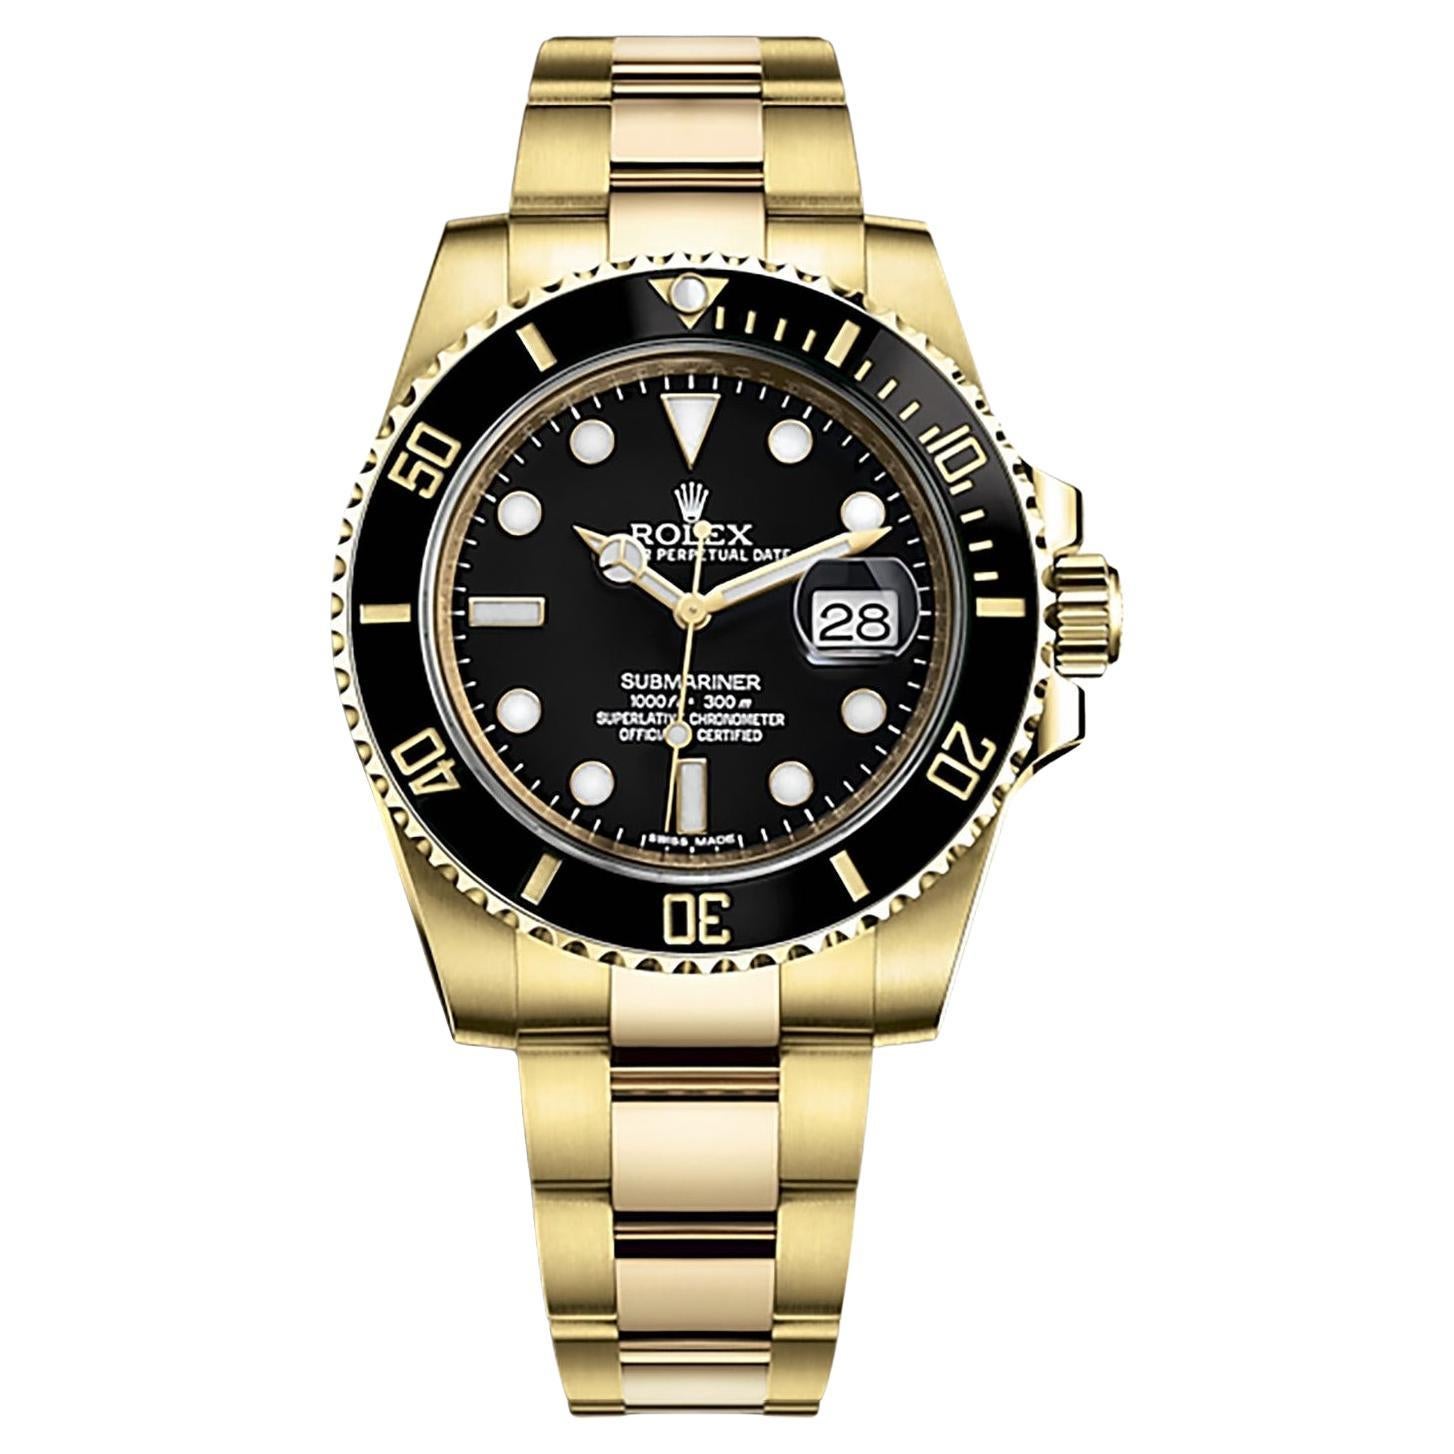 Montre homme Rolex Submariner Date Automatic Yellow Gold Black Dial 116618LN